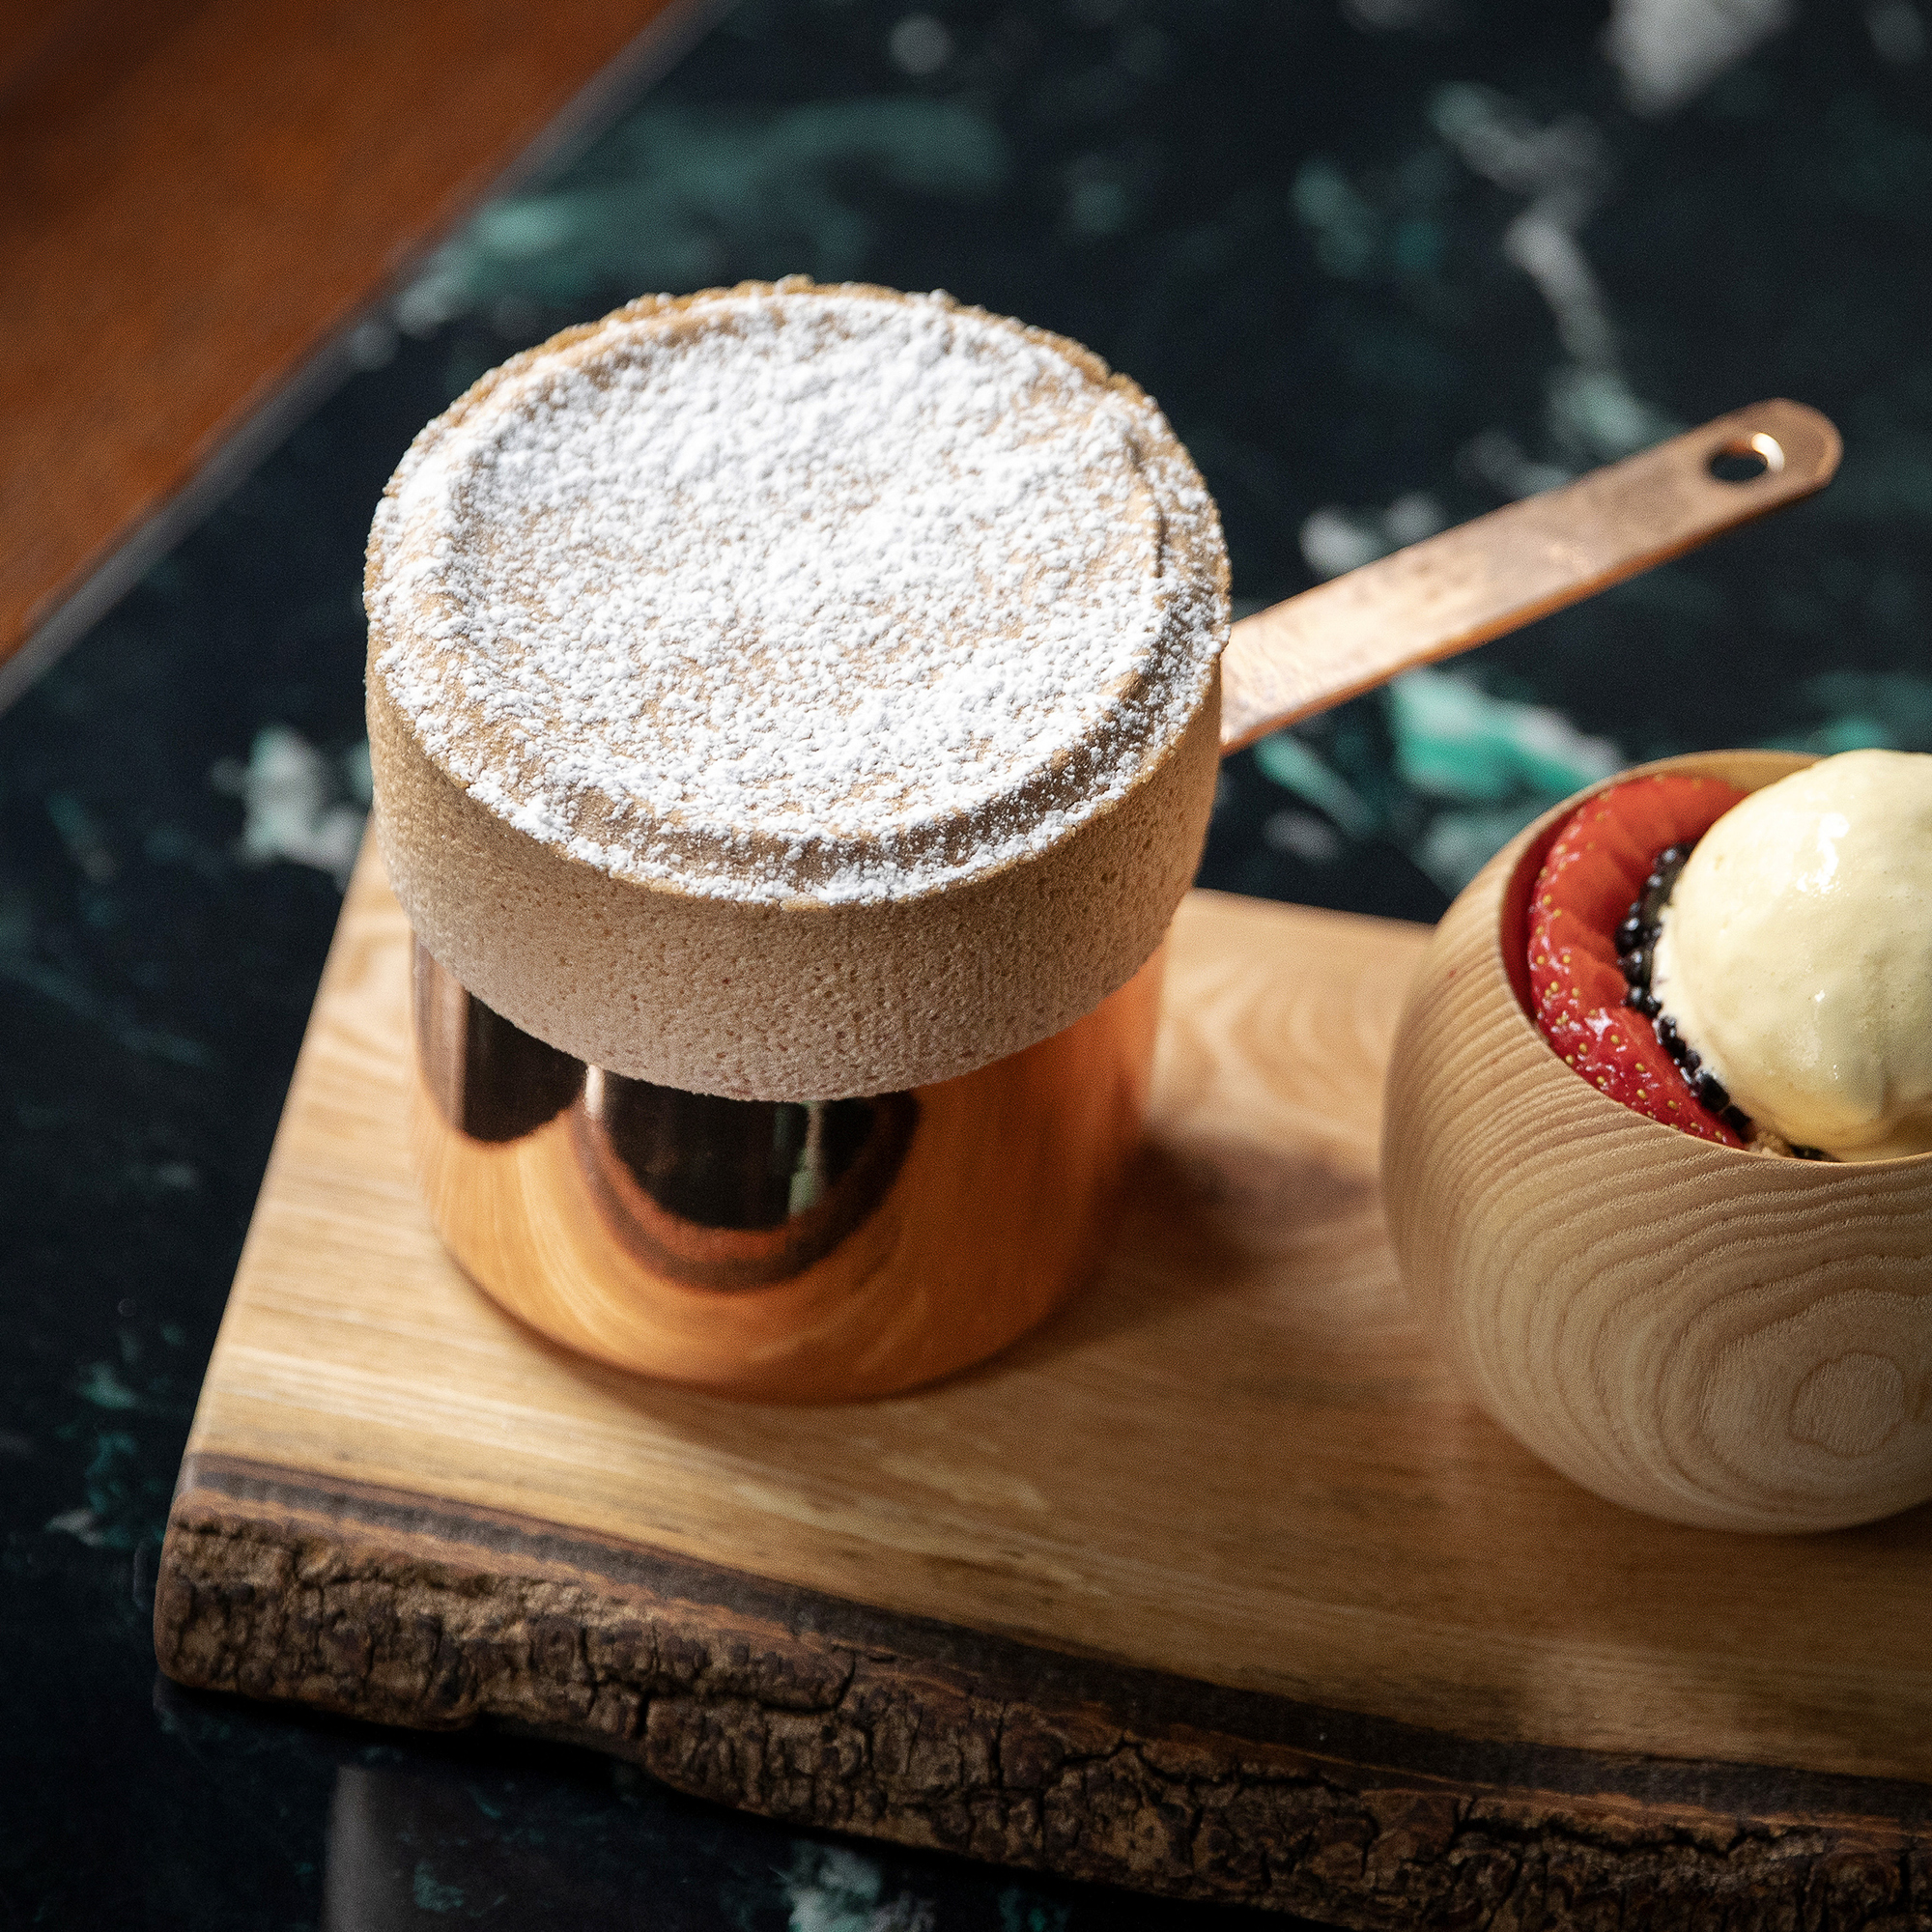 Soufflés are a recurring theme at The Princess of Shoreditch